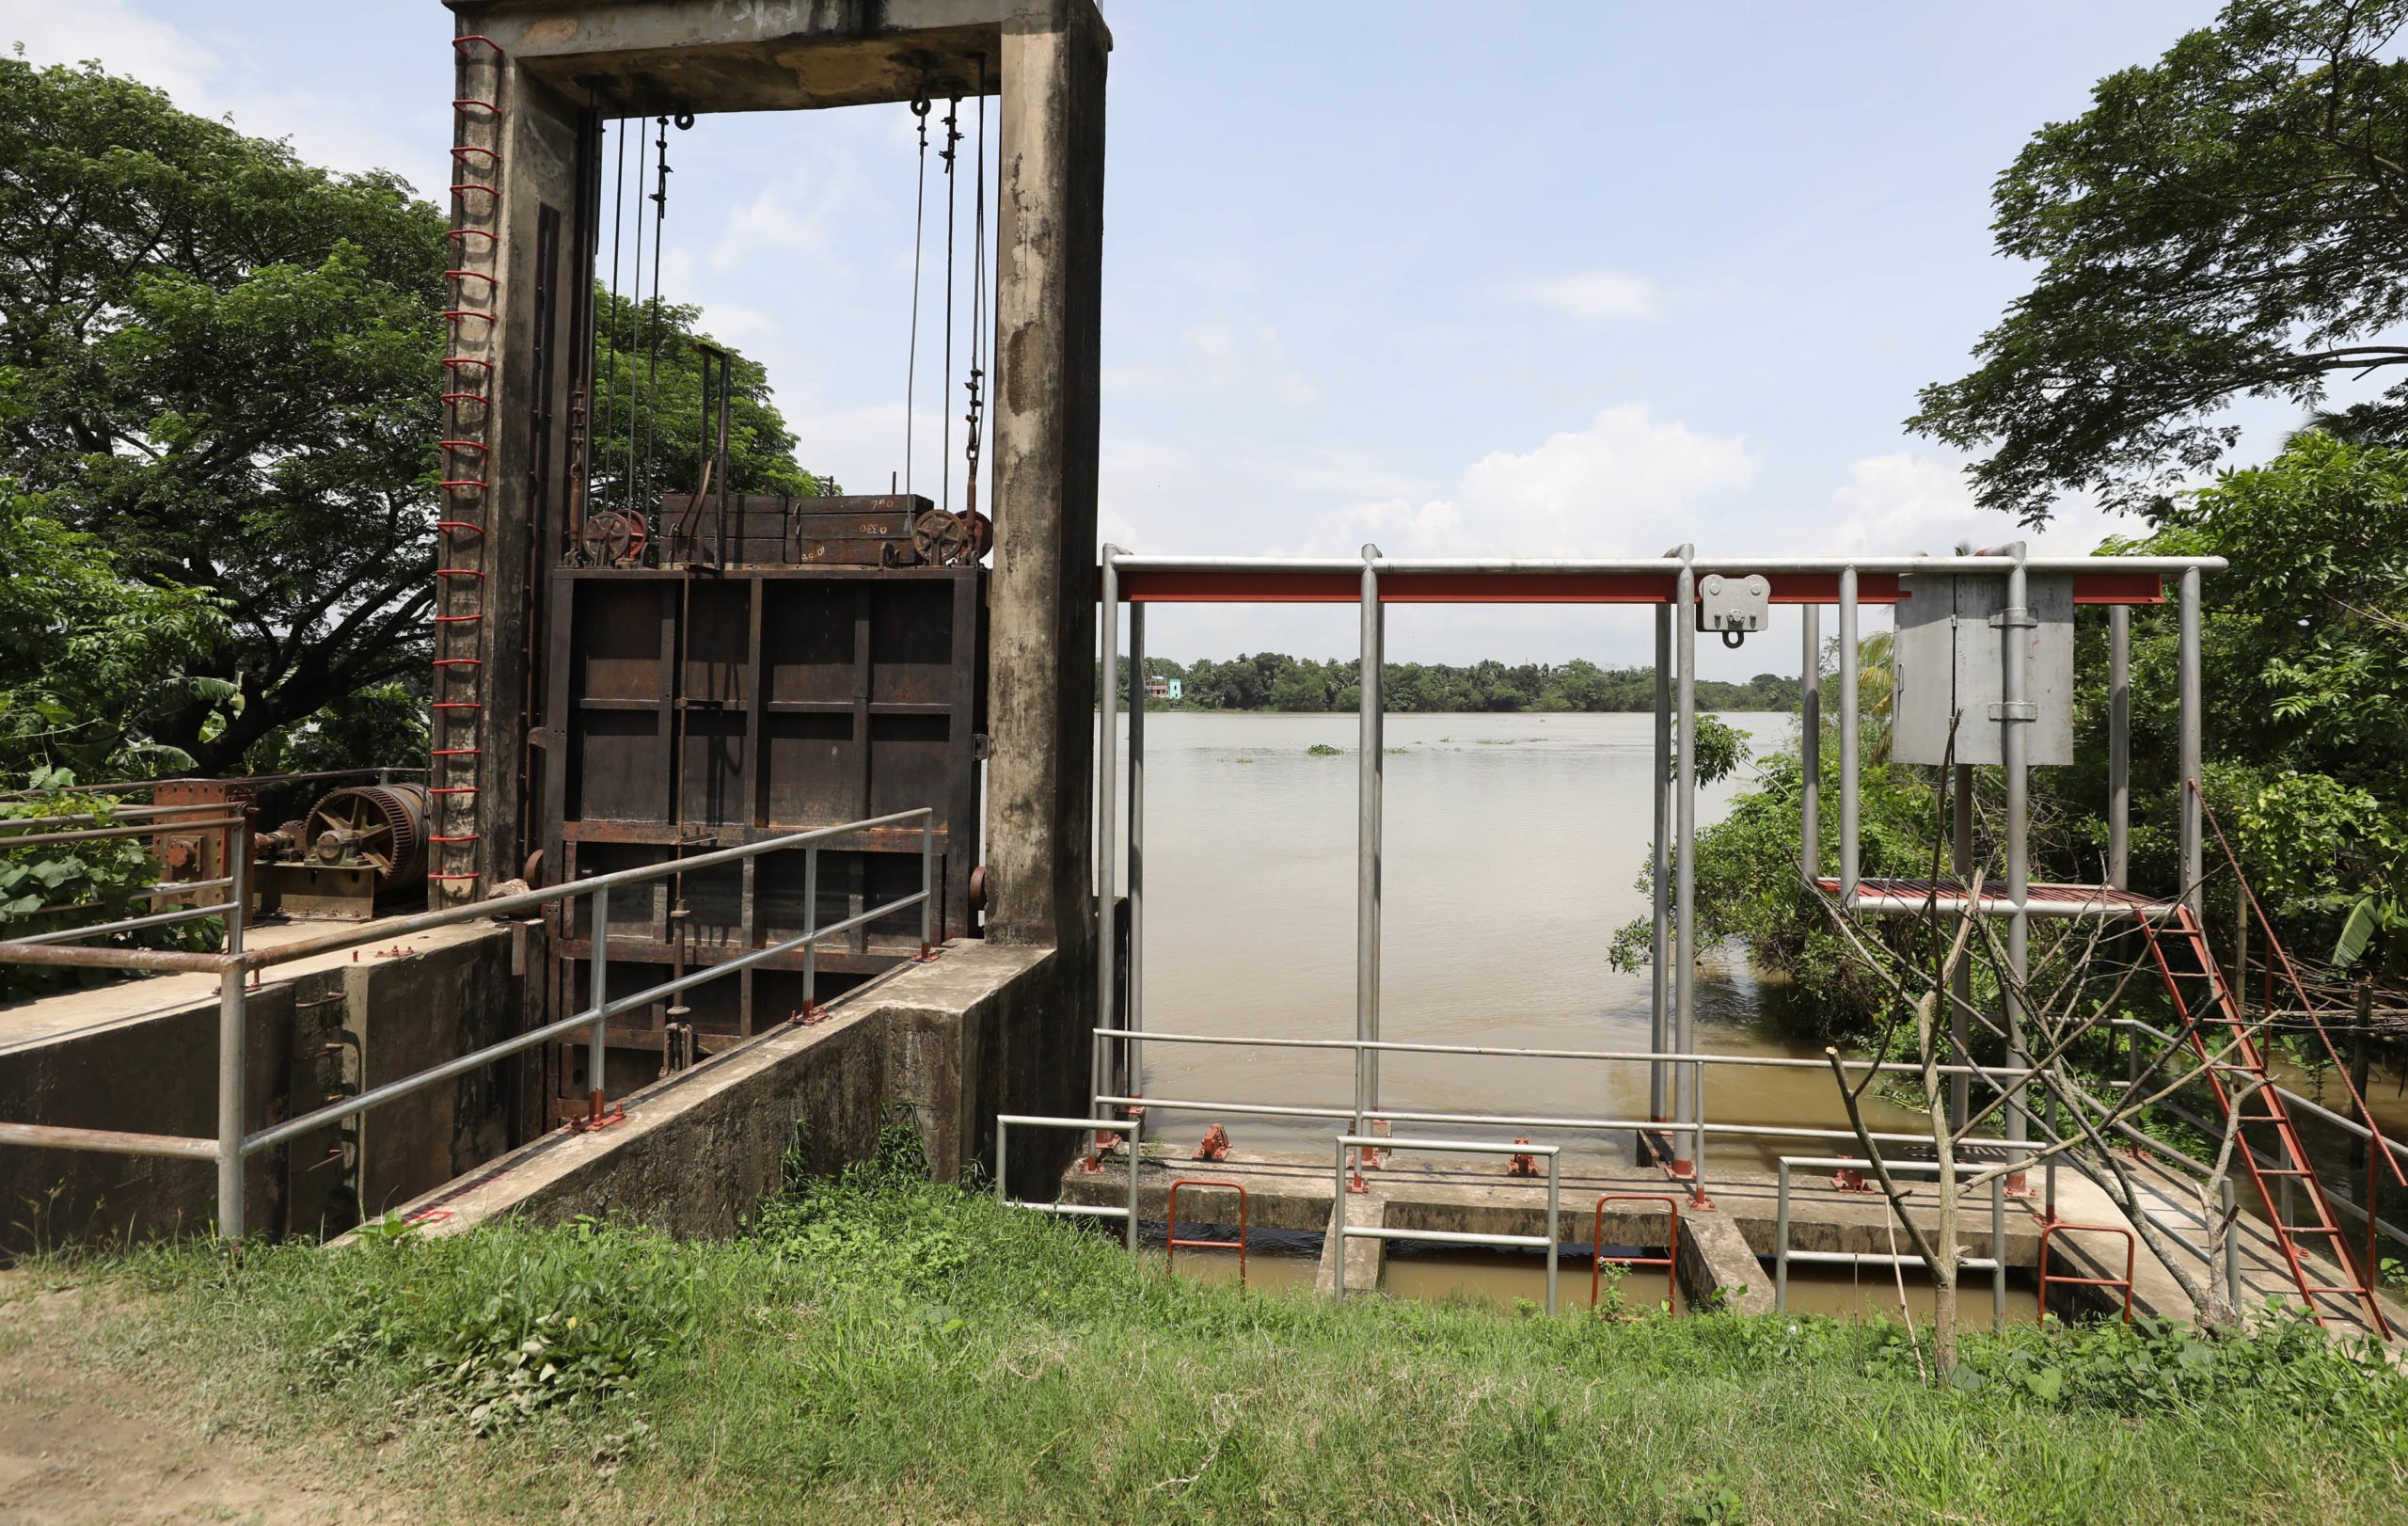 A sluice gate at the mouth of a canal connected to the Halda River